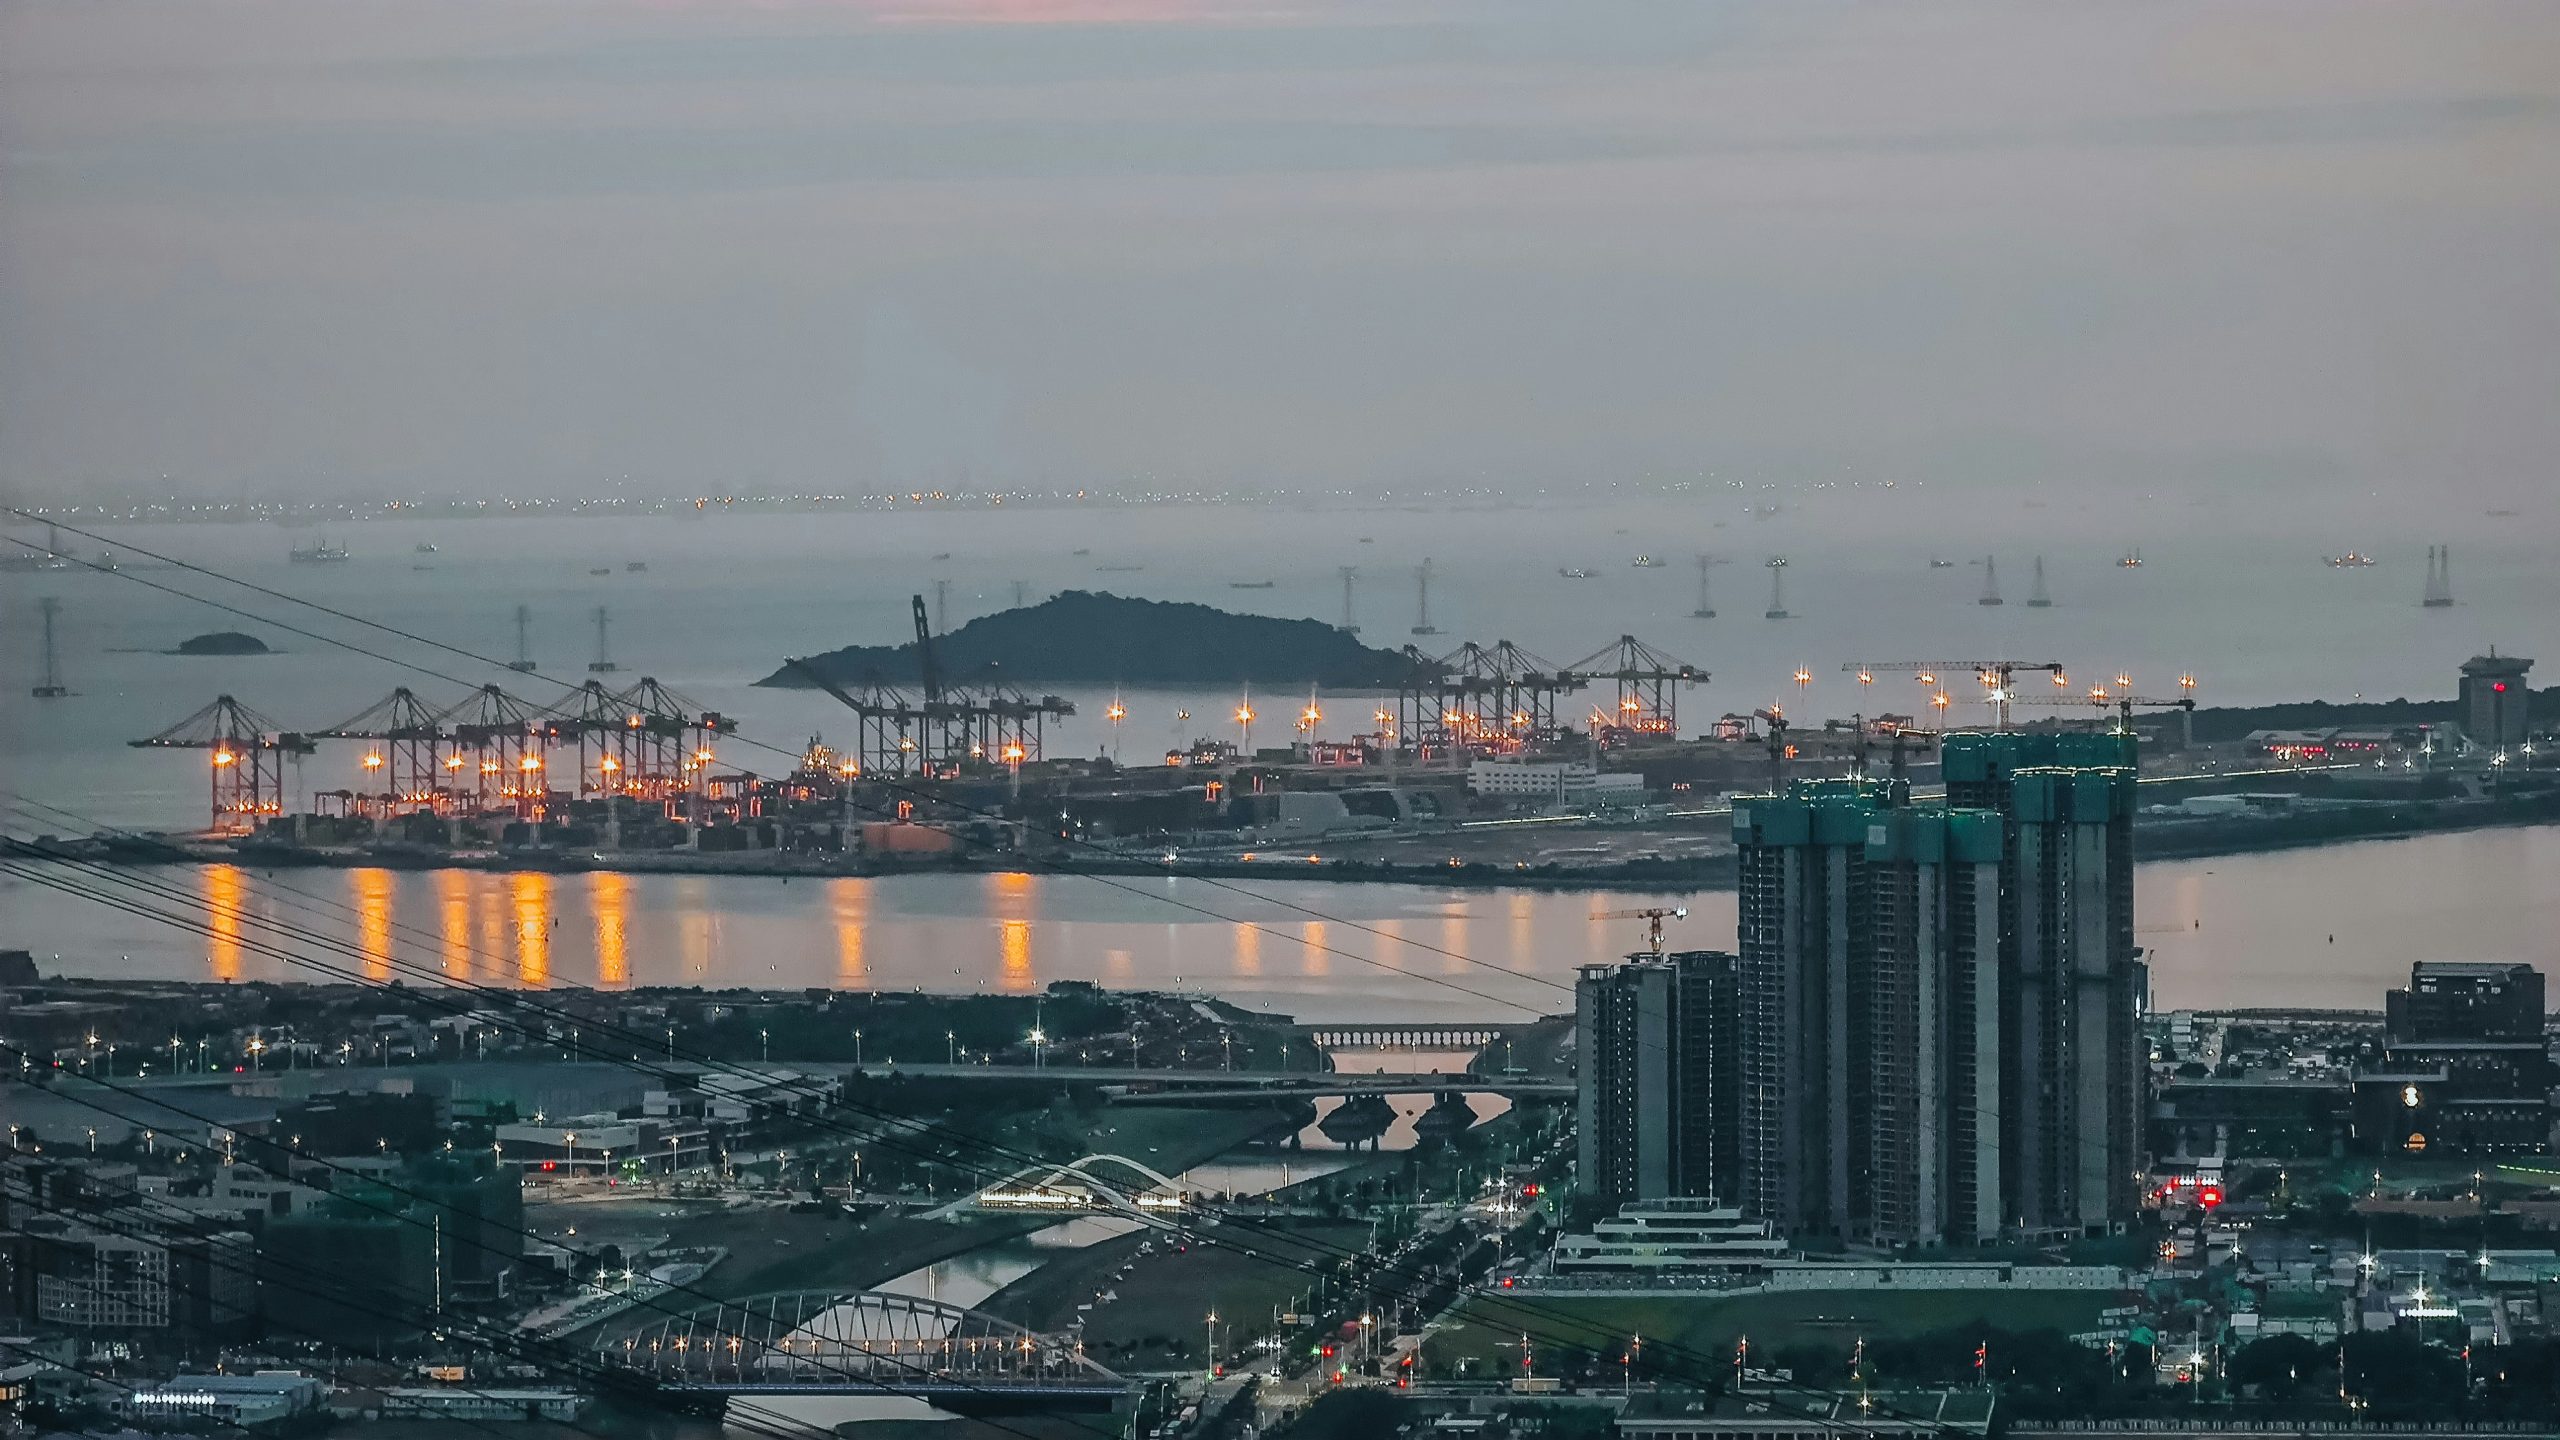 Port of Shenzhen stands as one of the busiest and most dynamic shipping hubs globally,